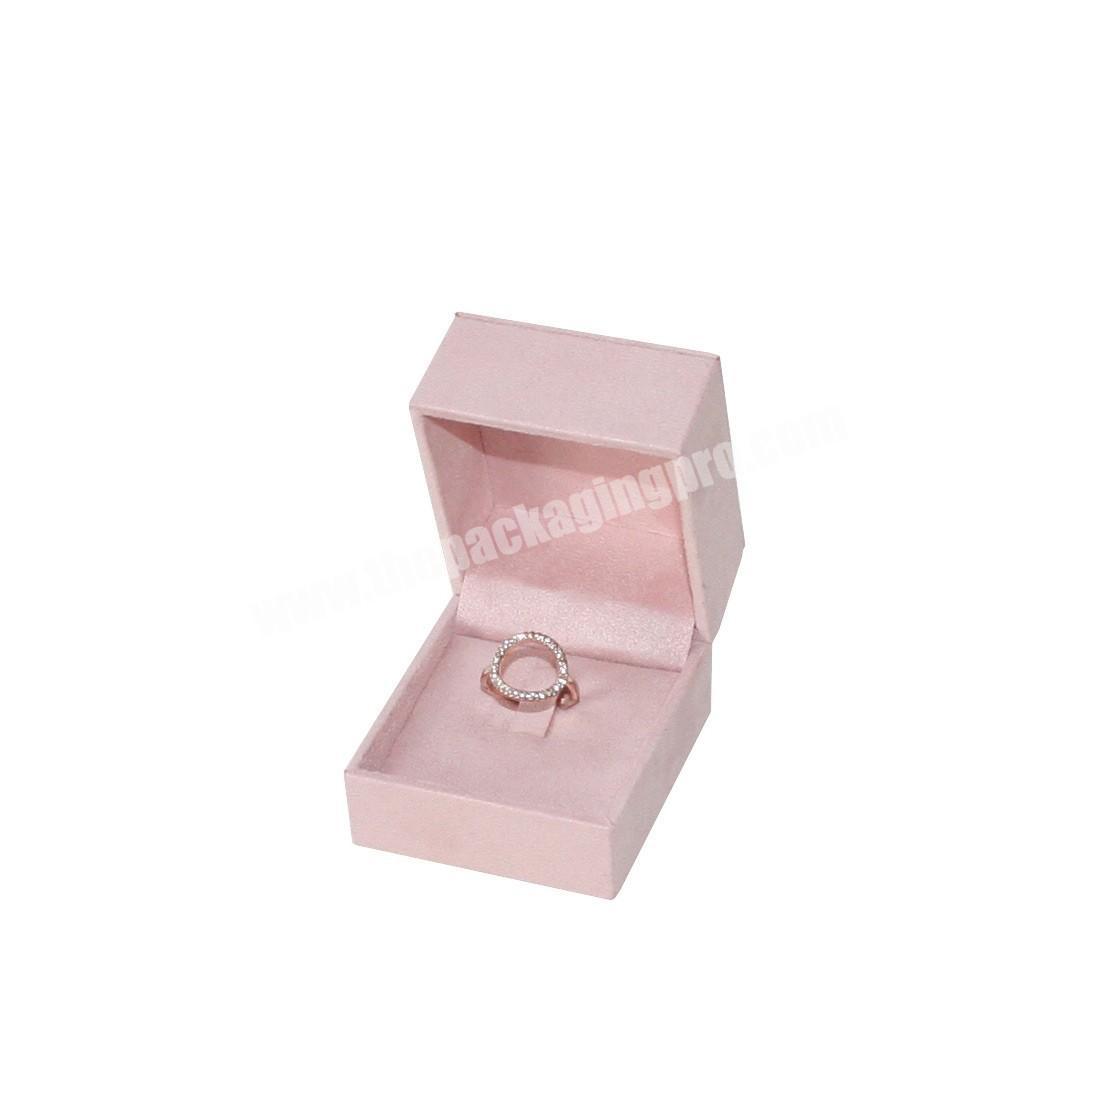 Wholesale Cardboard Box 4 Colors Gift Jewelry Earring Packaging Box